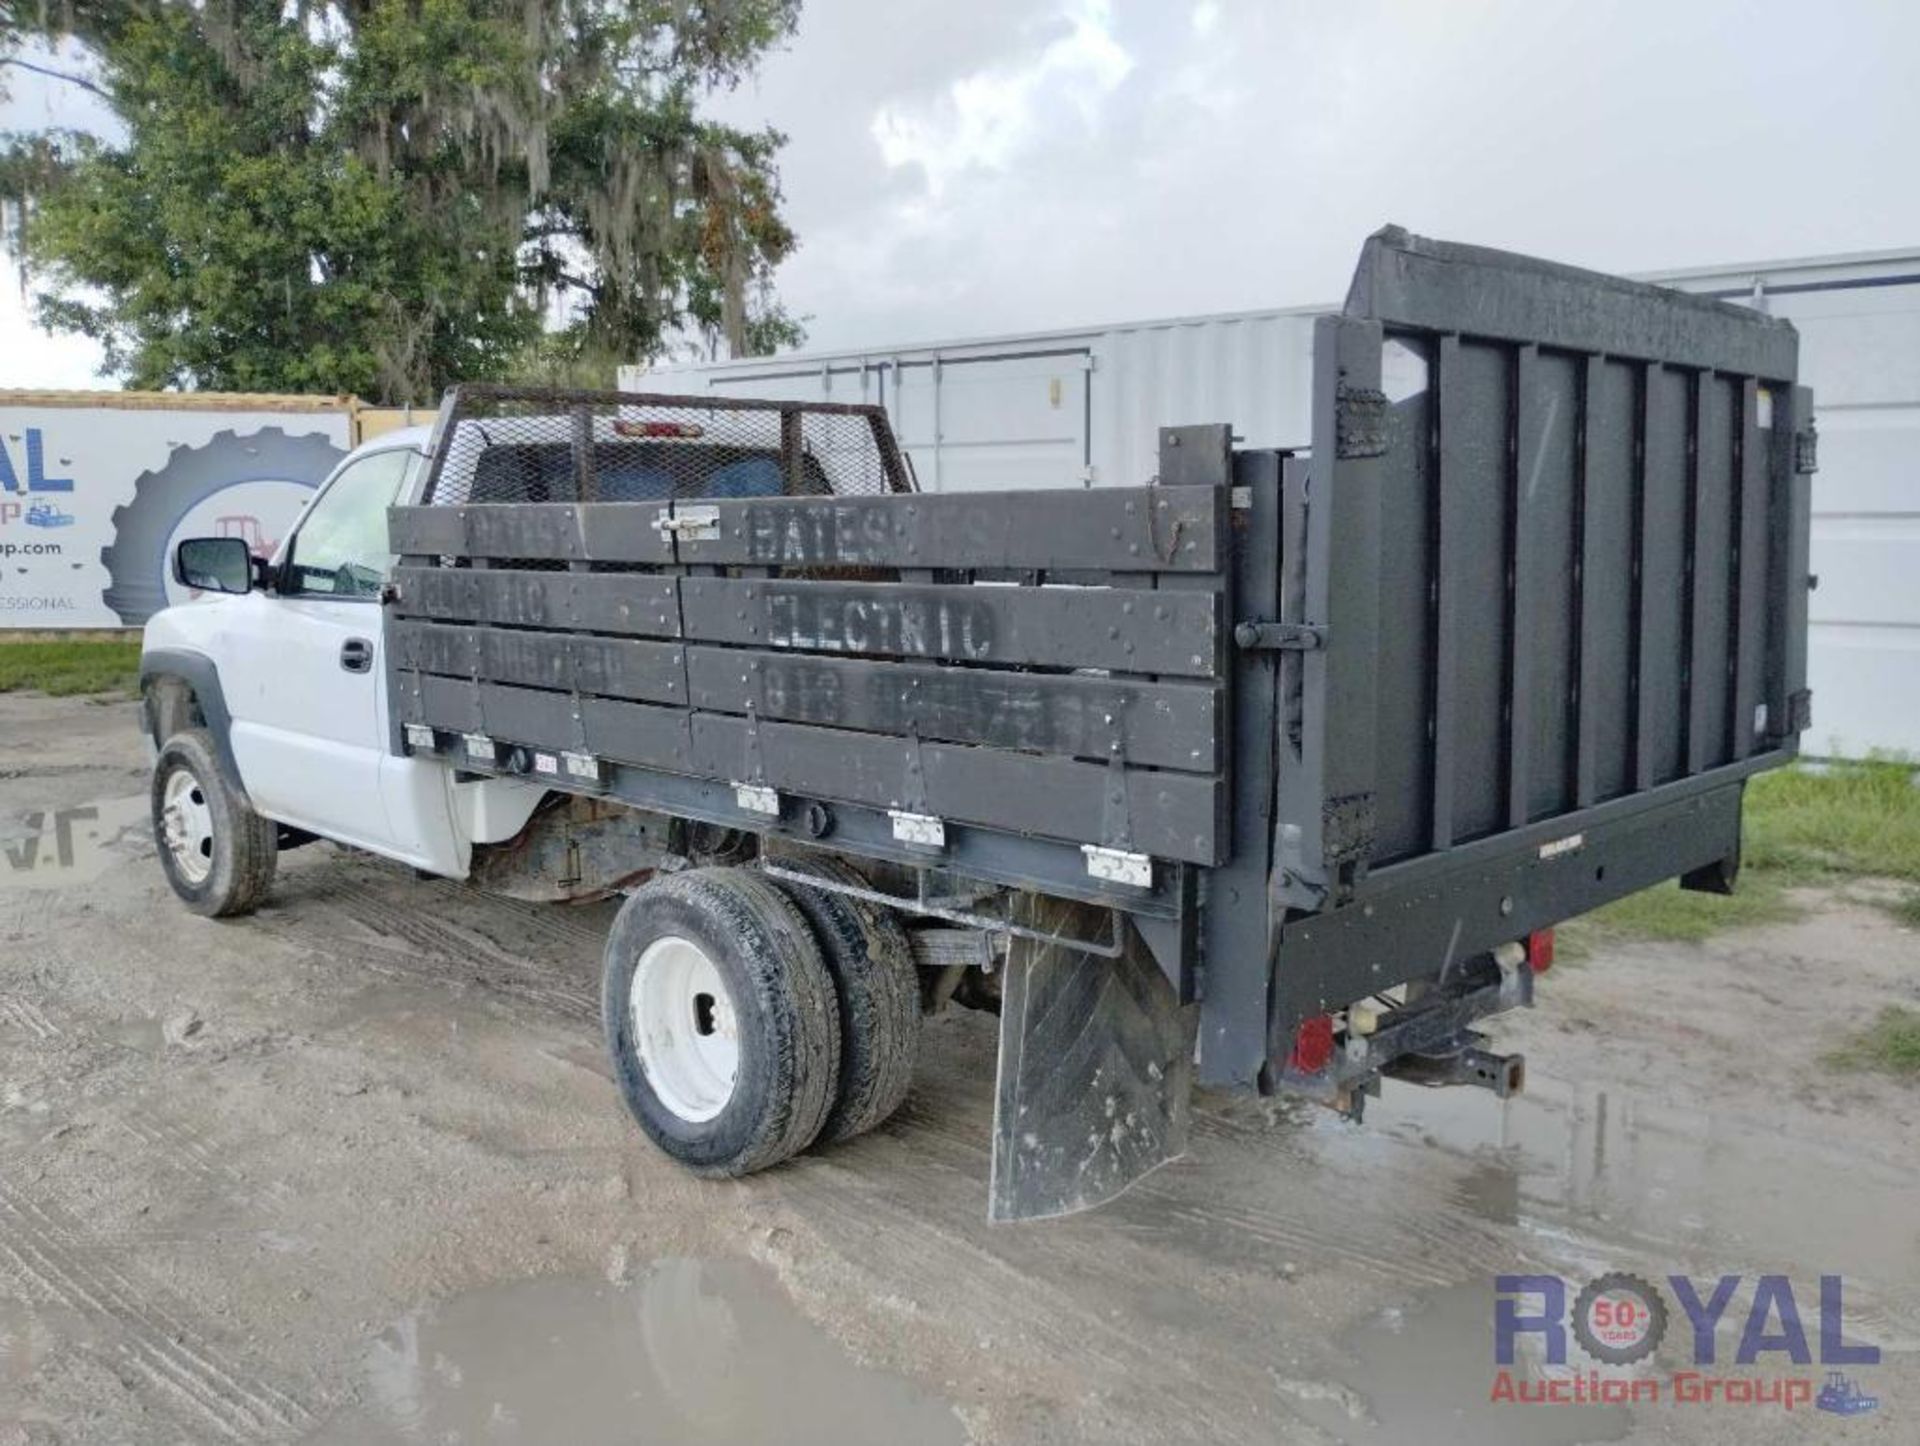 2001 Chevrolet 3500 Flatbed Truck - Image 4 of 29